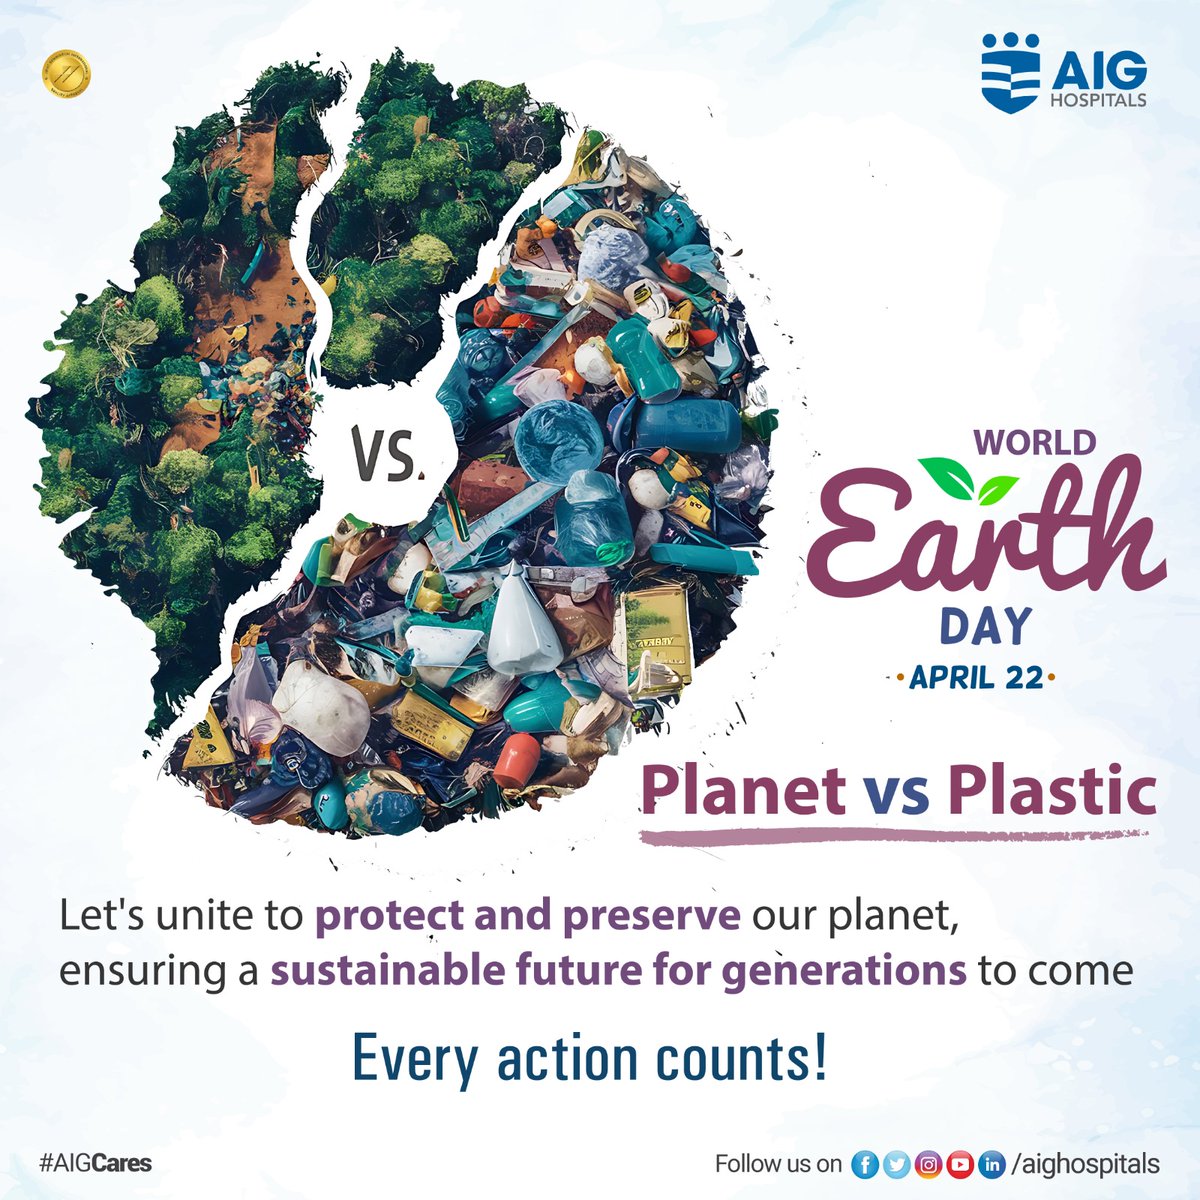 World Earth Day! 🌍 Let's unite to protect and preserve our planet, ensuring a sustainable future for generations to come. Every action counts! 🌱 Planet Vs Plastic #EarthDay #WorldEarthDay #ProtectOurPlanet #AIGHospitals #Awareness #Health #AIGCares #Planet #Plastic #world